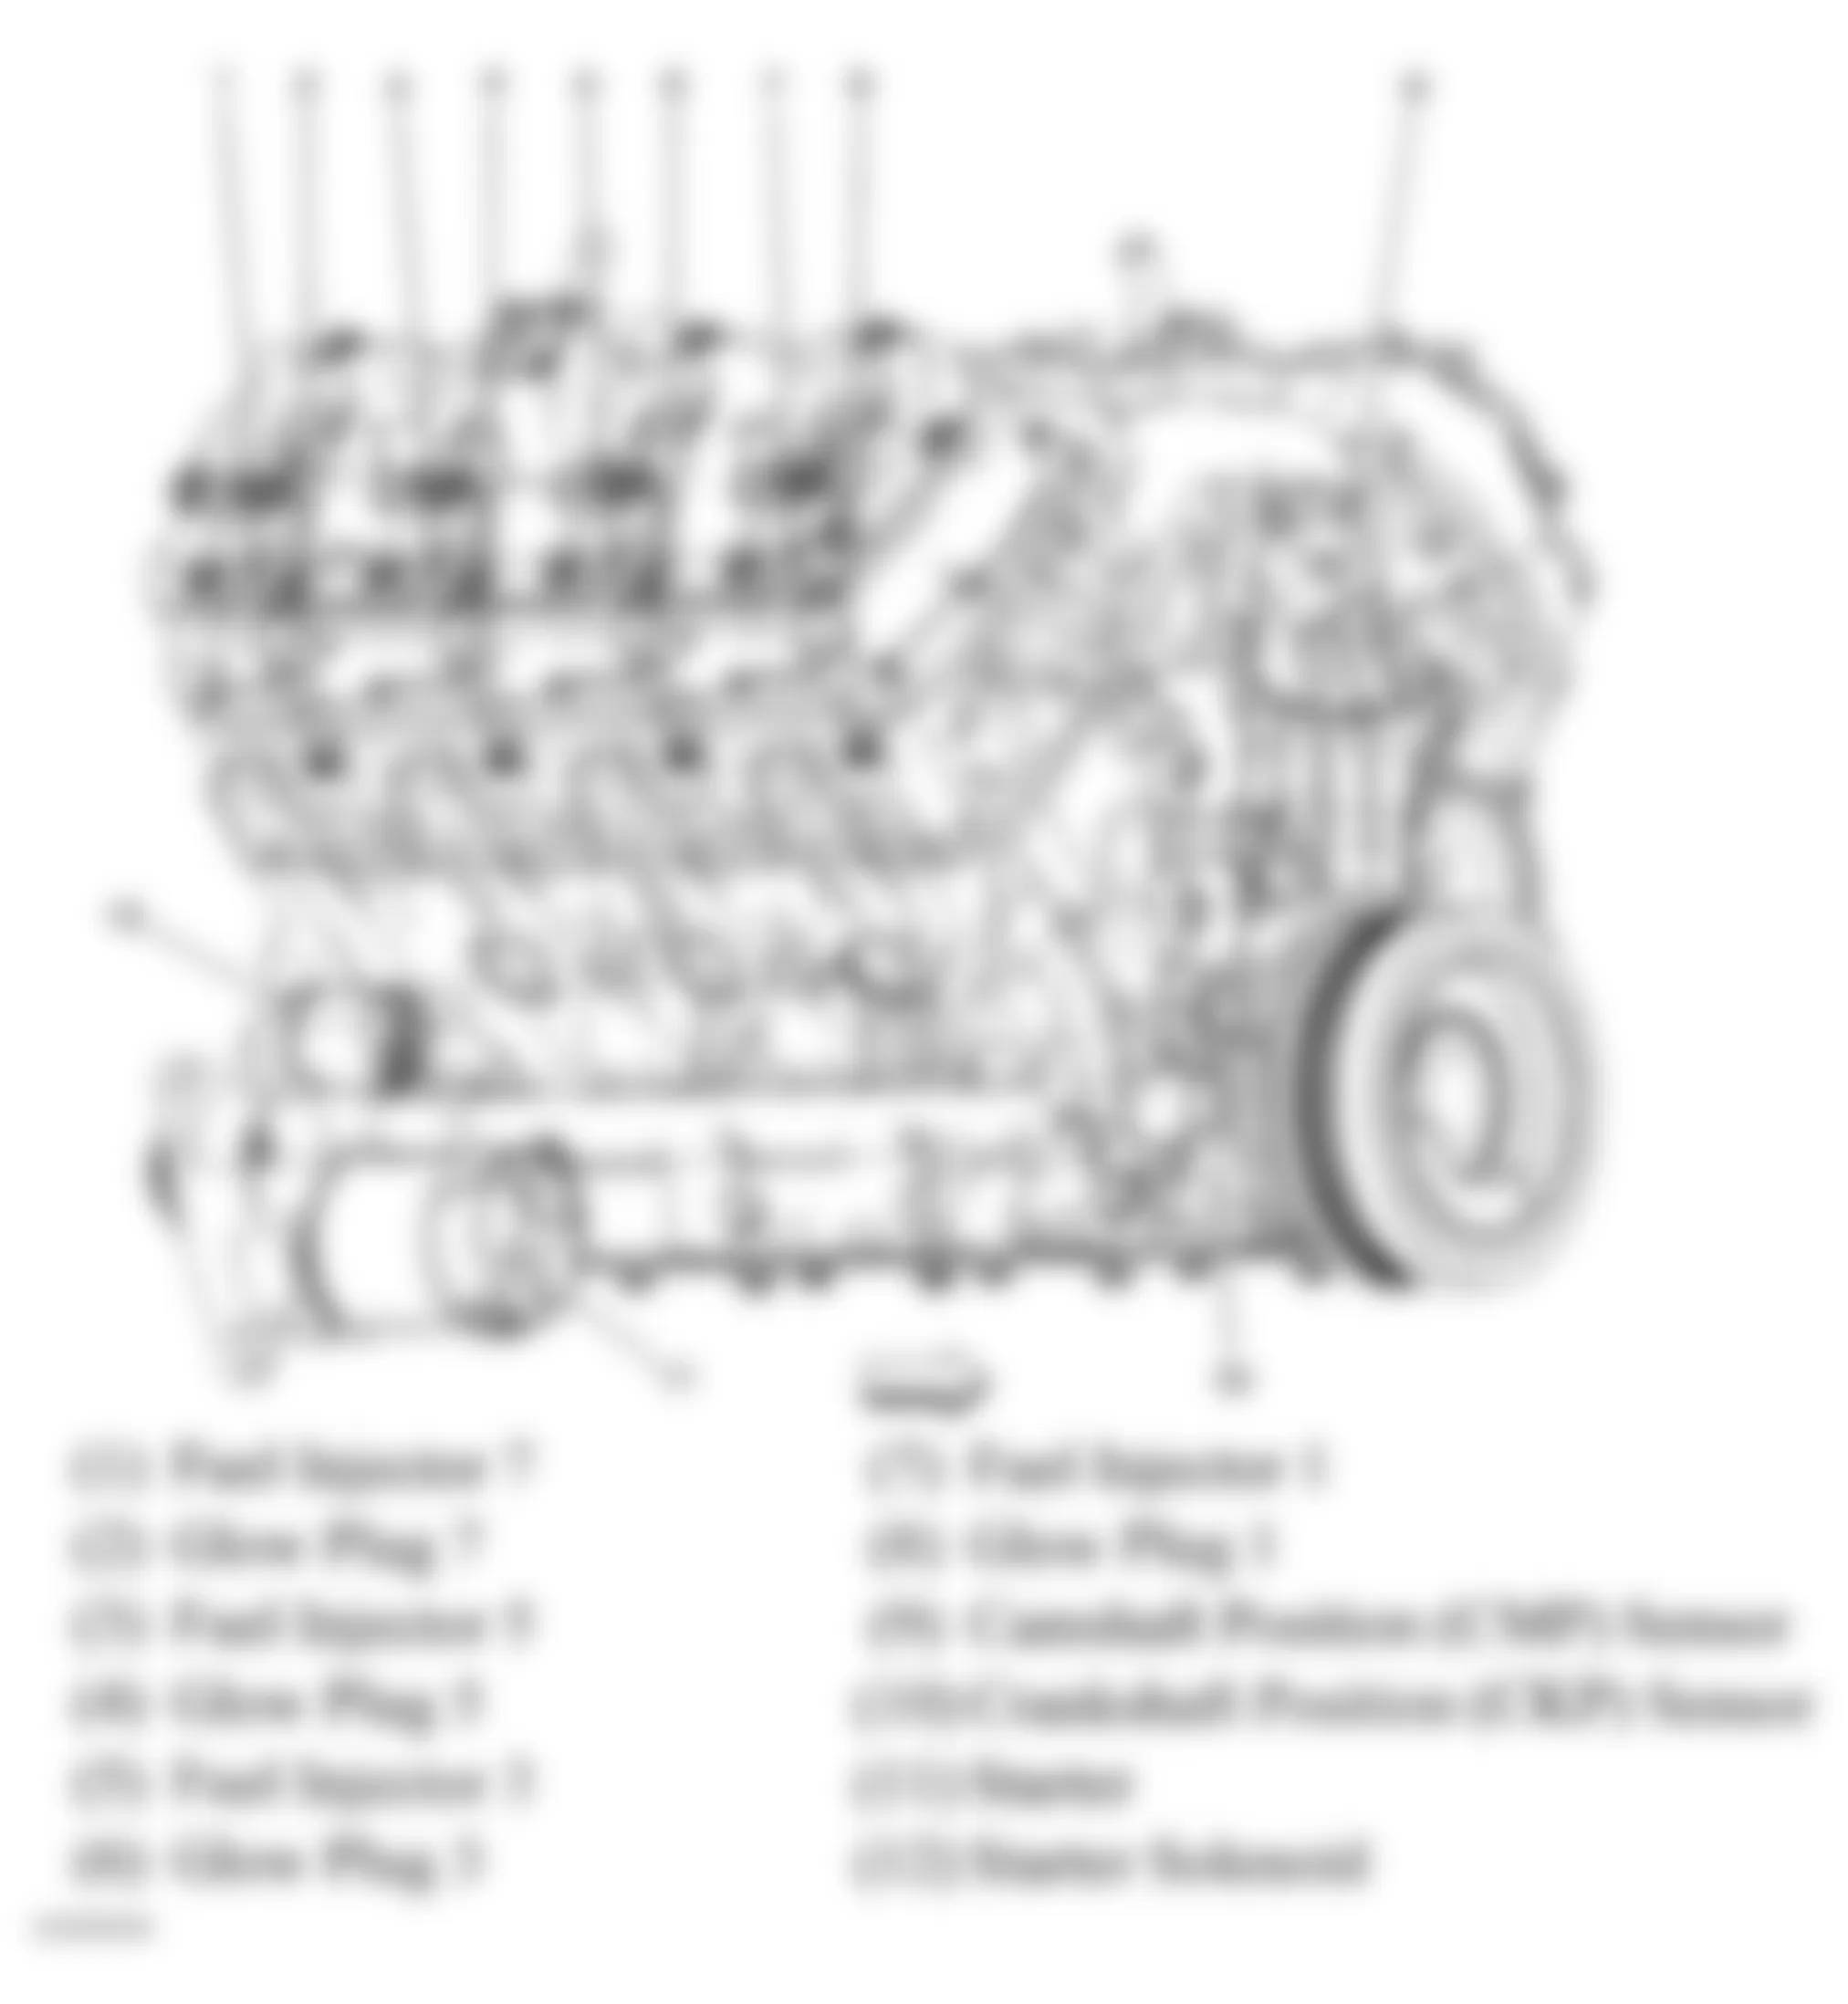 GMC Savana H1500 2006 - Component Locations -  Right Side Of Engine (6.6L VIN W)